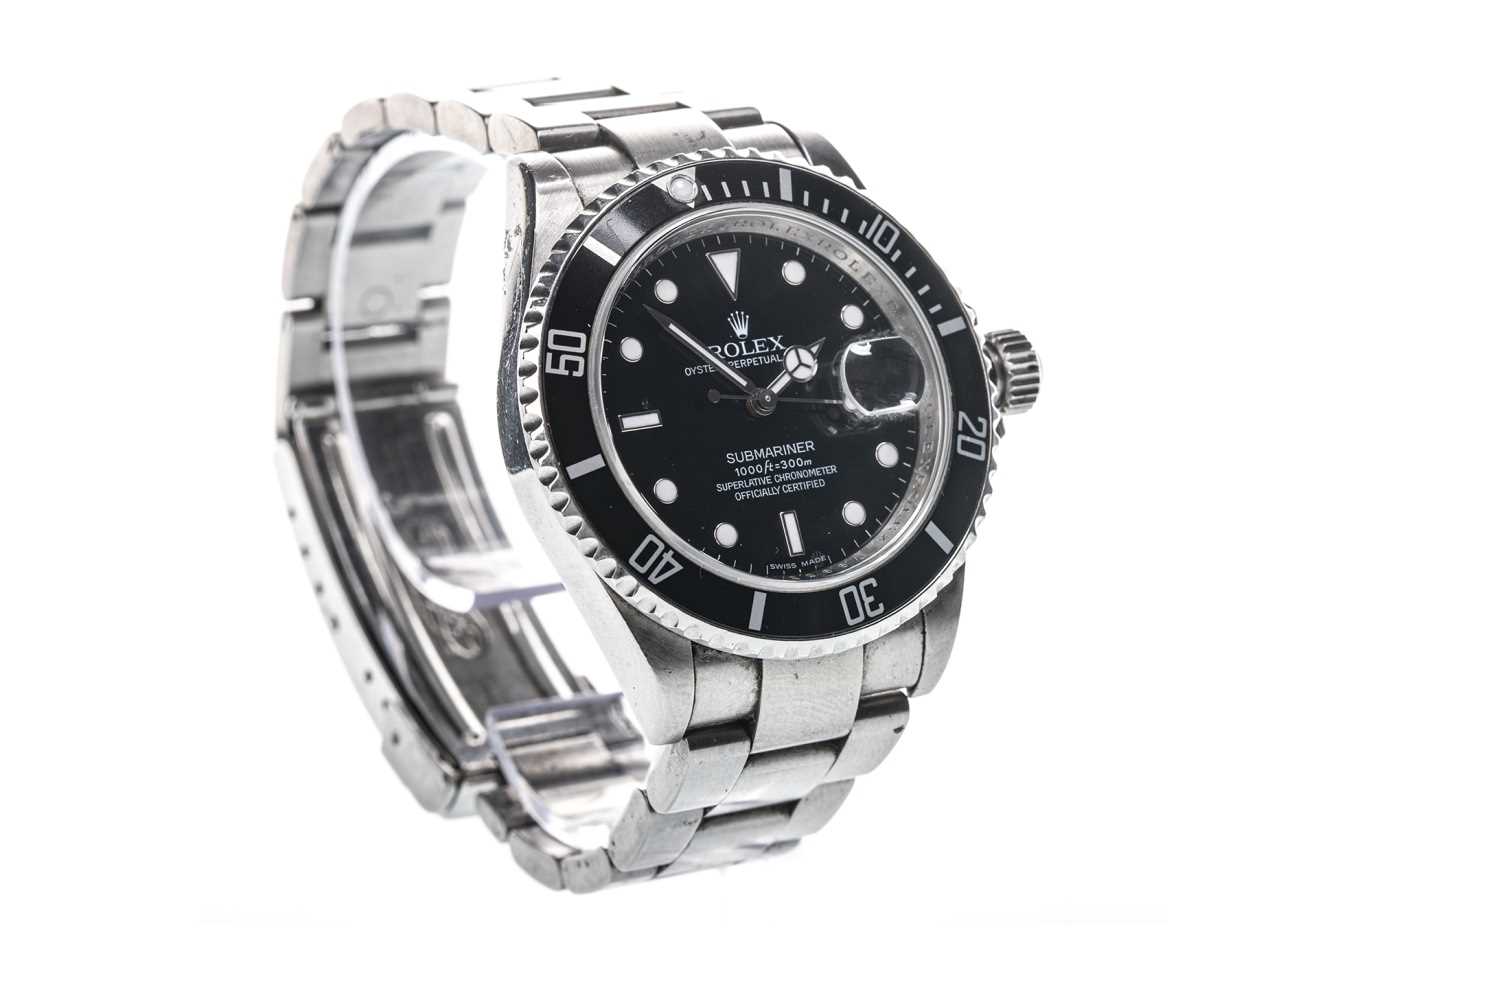 Lot 859 - GENTLEMAN'S ROLEX OYSTER PERPETUAL DATE SUBMARINER STAINLESS STEEL AUTOMATIC WRIST WATCH